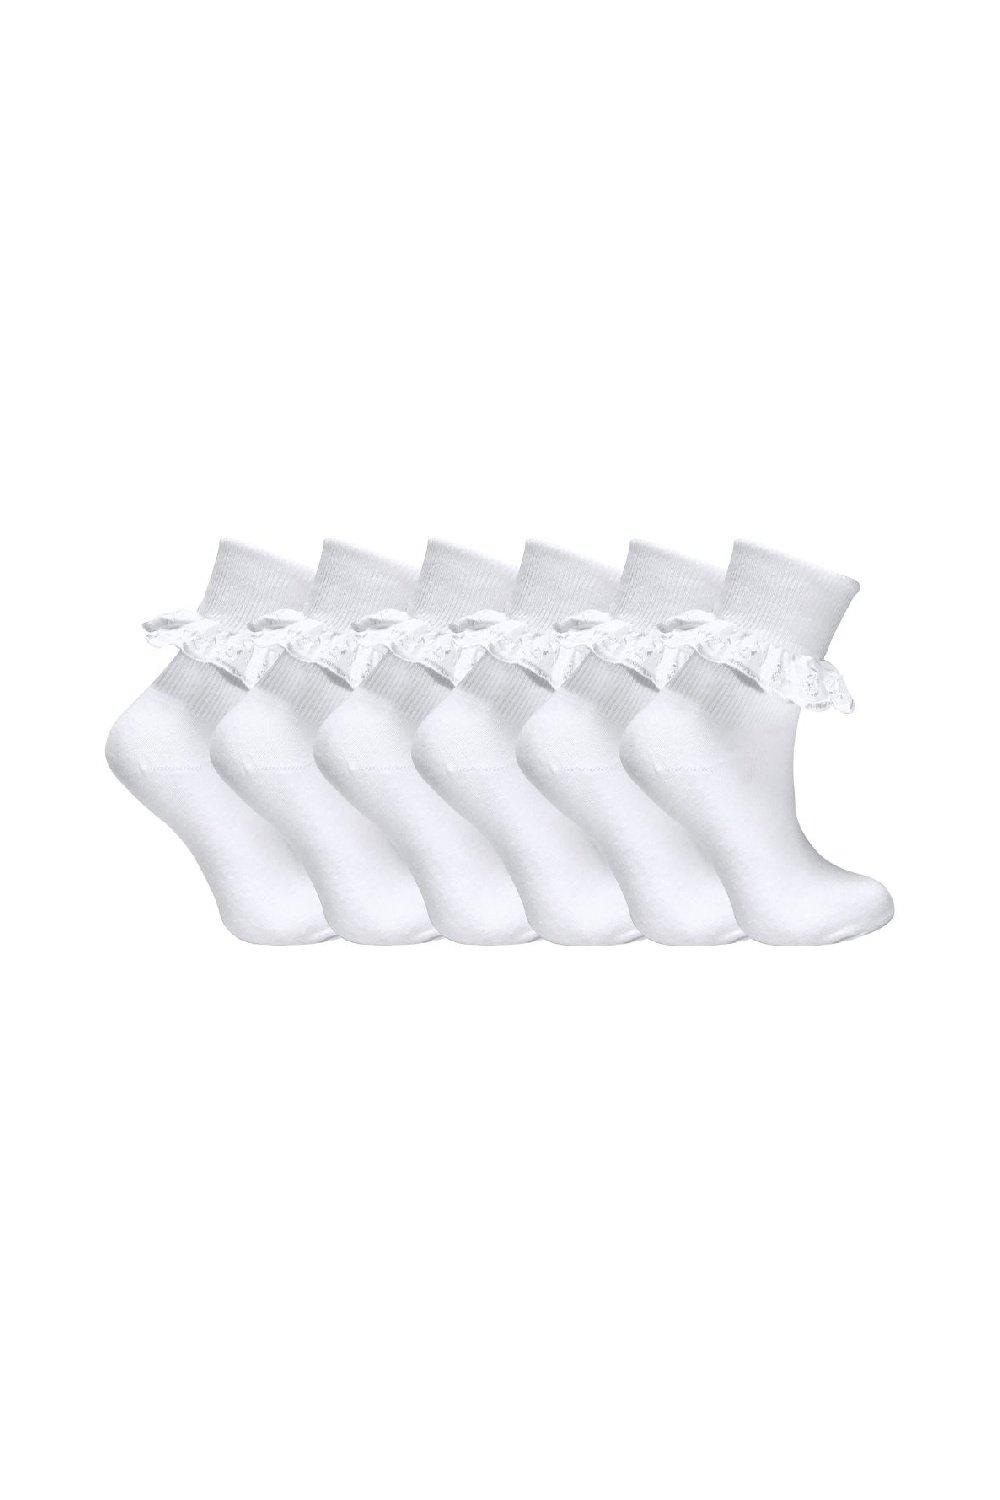 6 Pairs Baby Frilly Lace Fancy Soft Cotton Socks